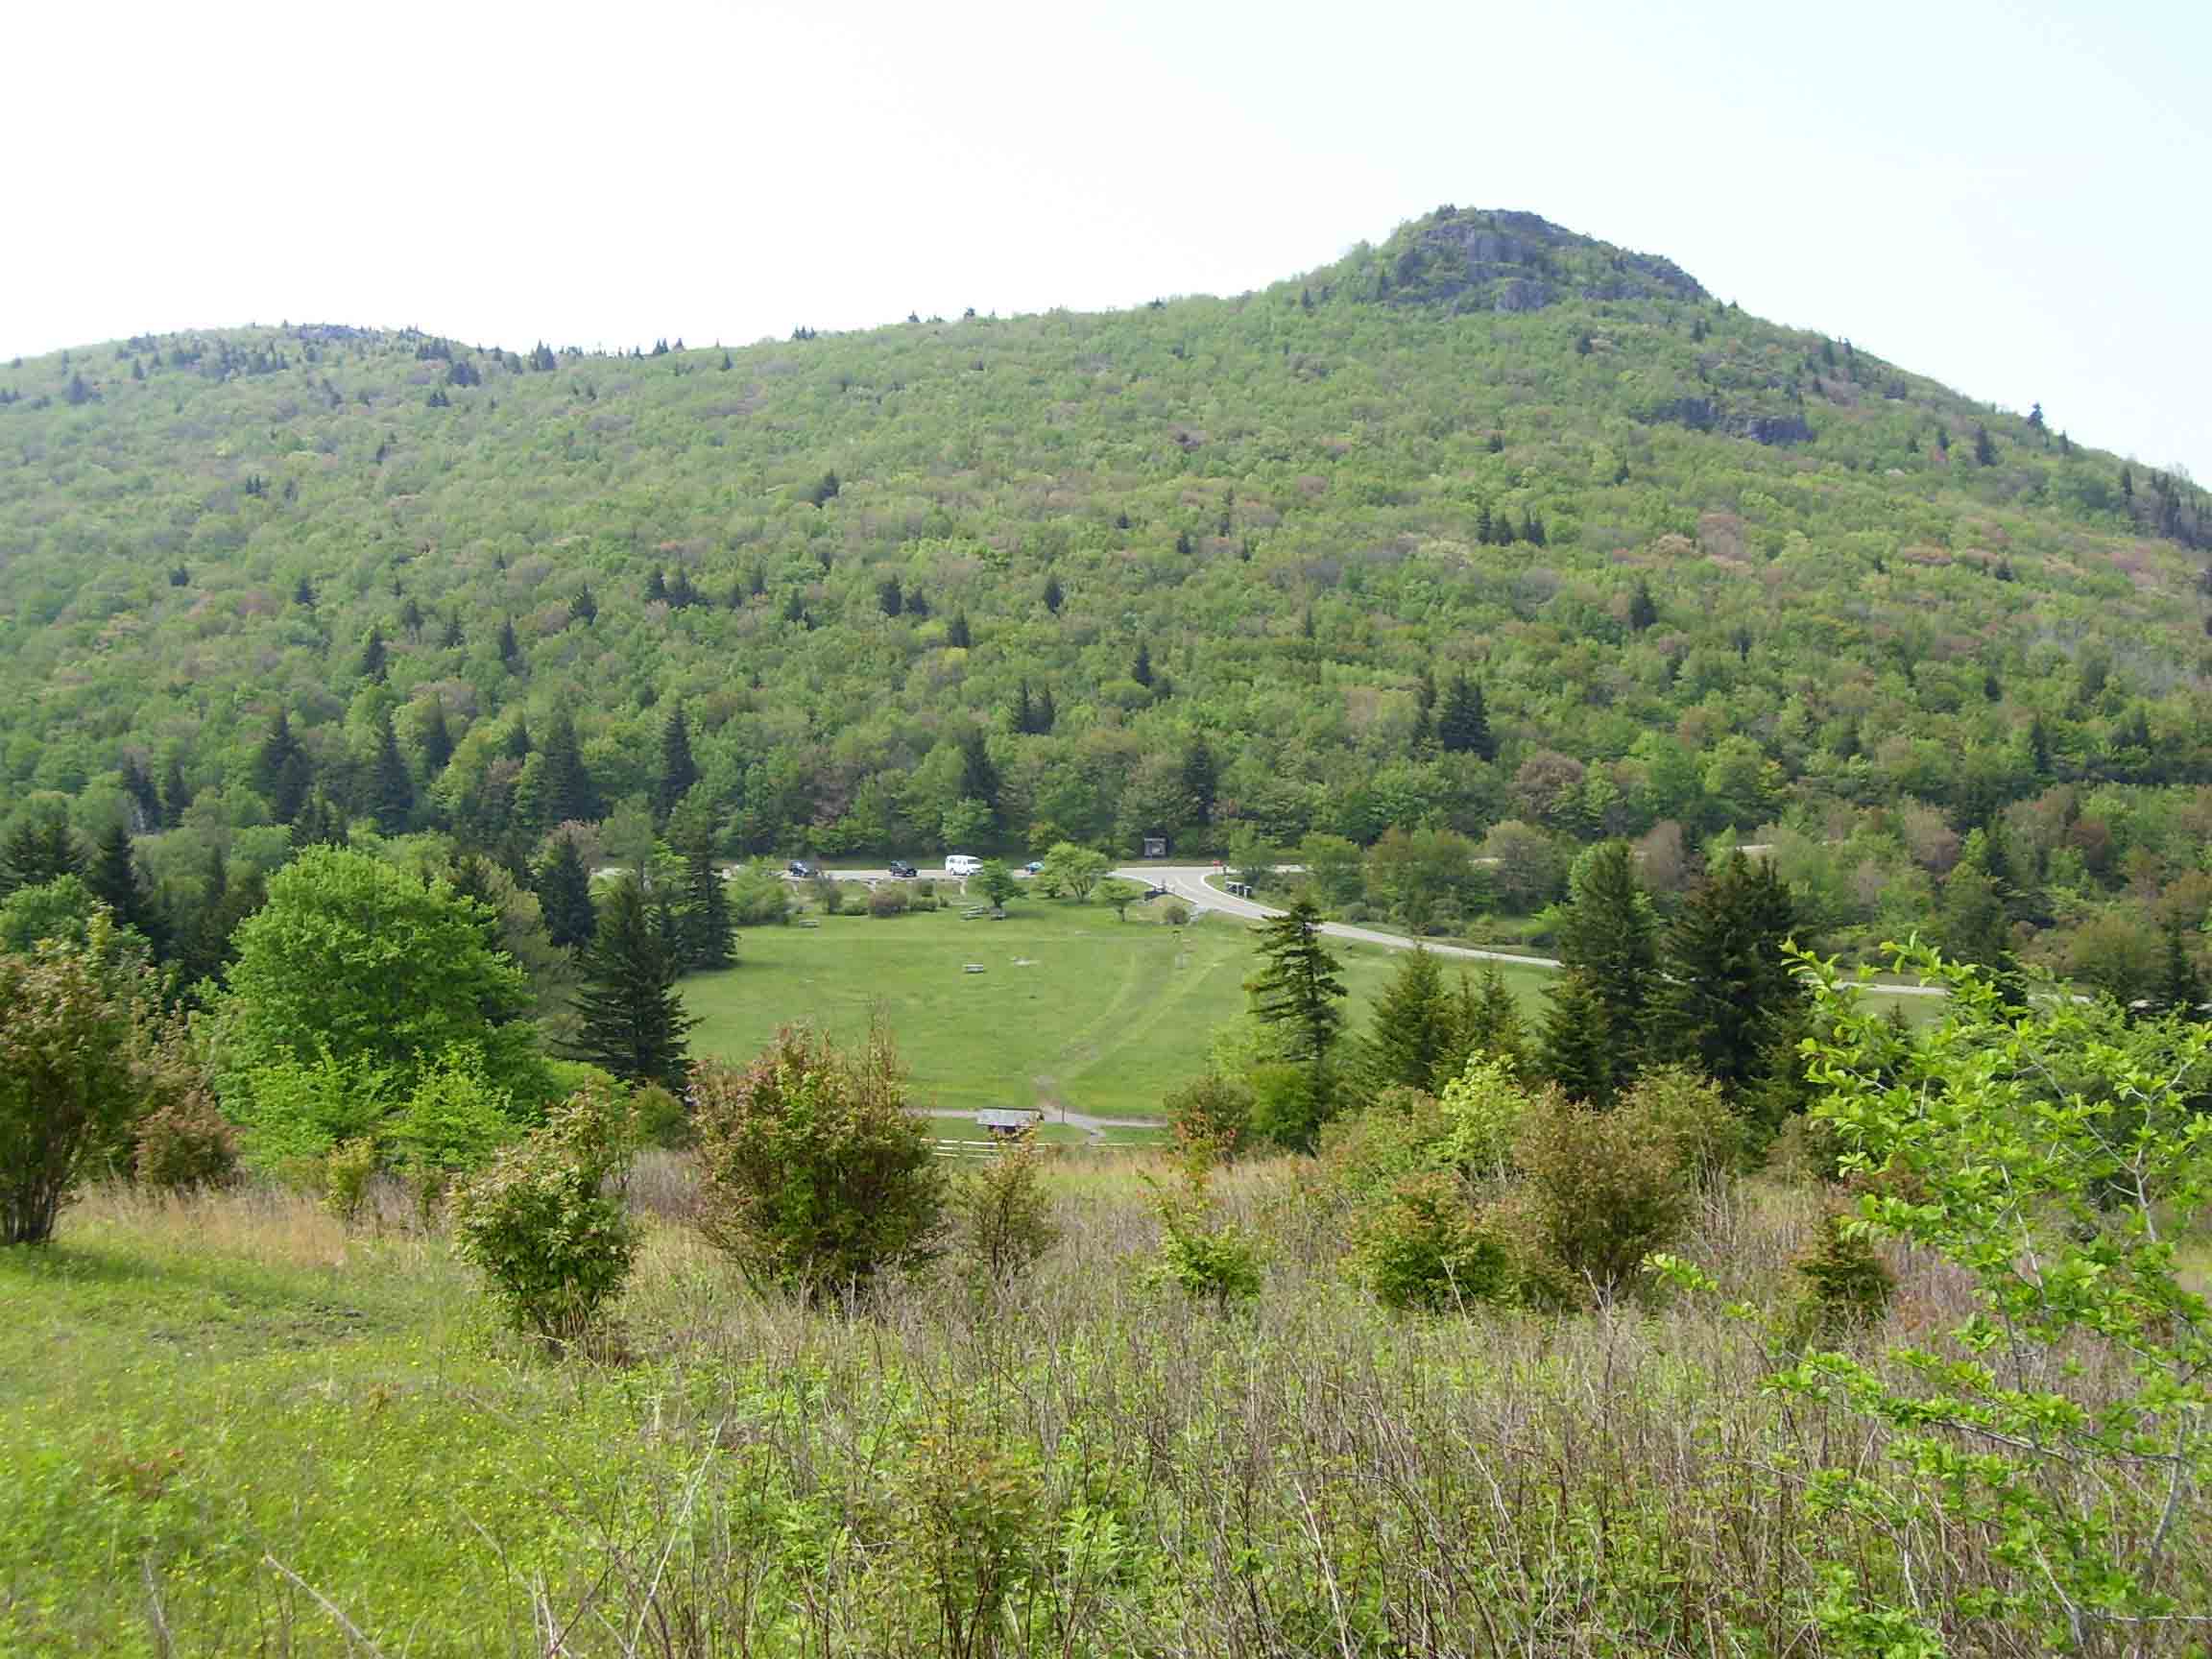 Massie Gap as seen from the Rhododendron Trail which meets the AT at MM 9.8. Some of the parking area can be seen on the left.  Courtesy dlcul@conncoll.edu